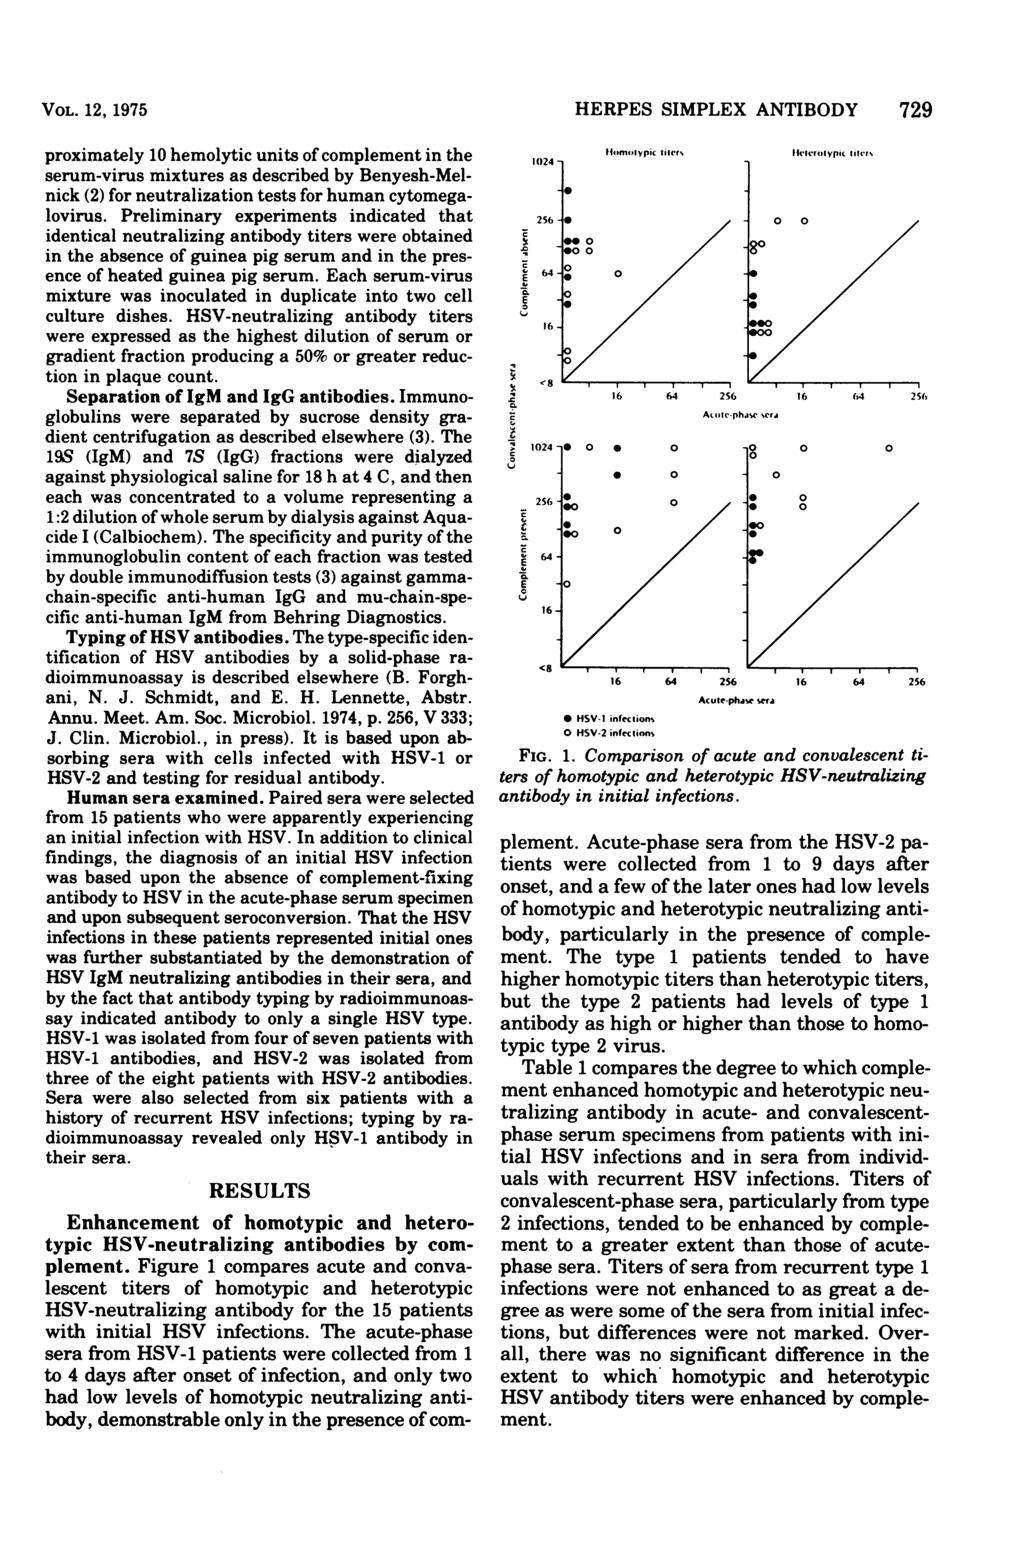 VOL. 12, 1975 proximately 1 hemolytic units of complement in the serum-virus mixtures as described by Benyesh-Melnick (2) for neutralization tests for human cytomegalovirus.